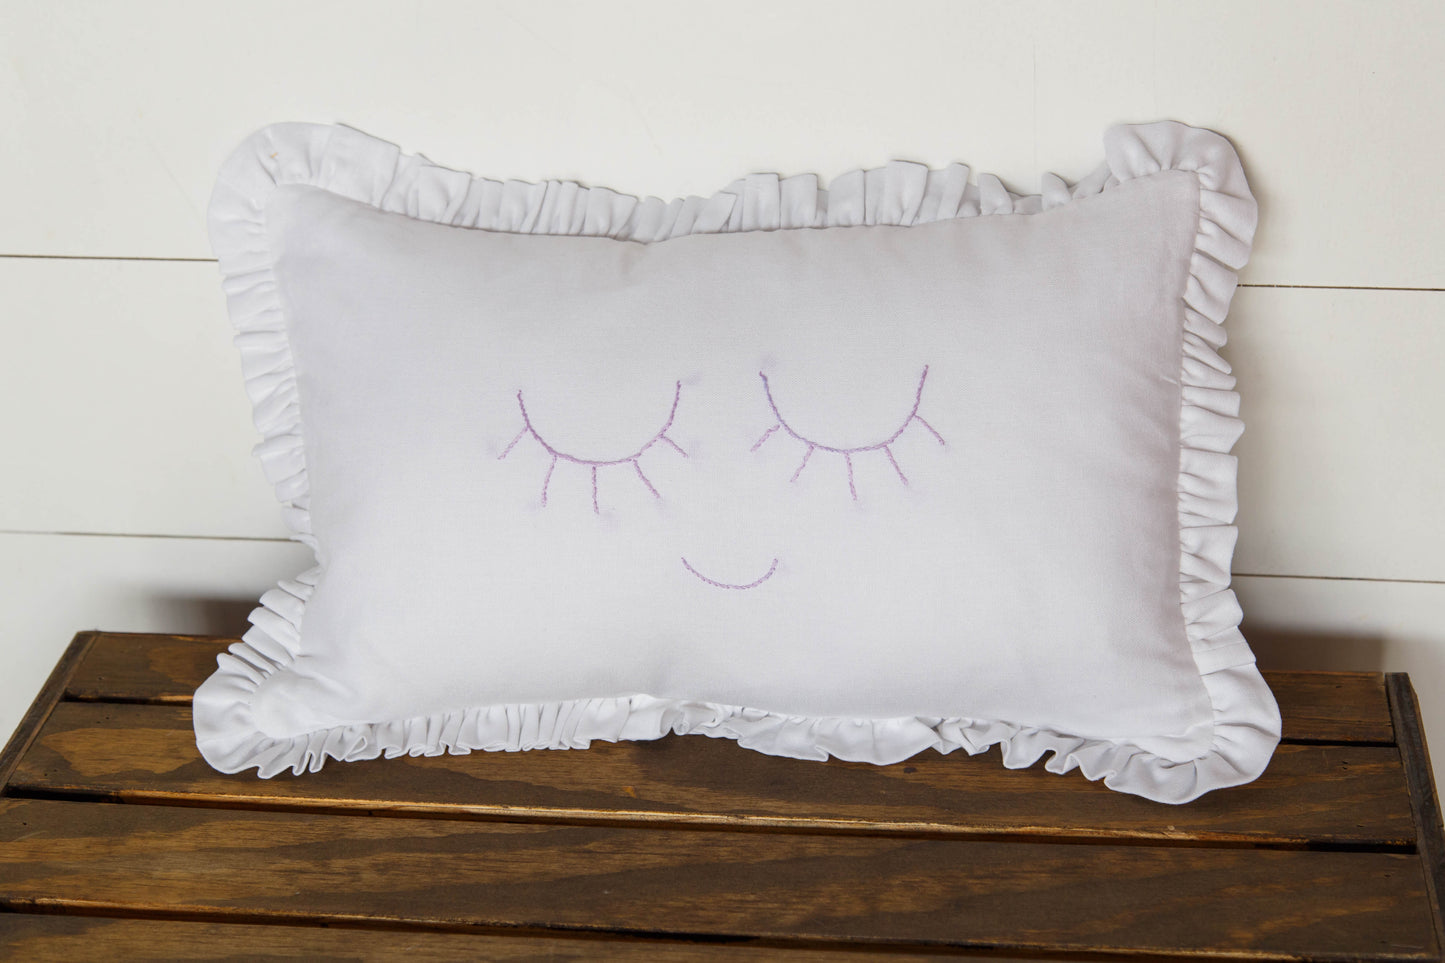 Sleepy Eyes Hand-Embroidered Pillow